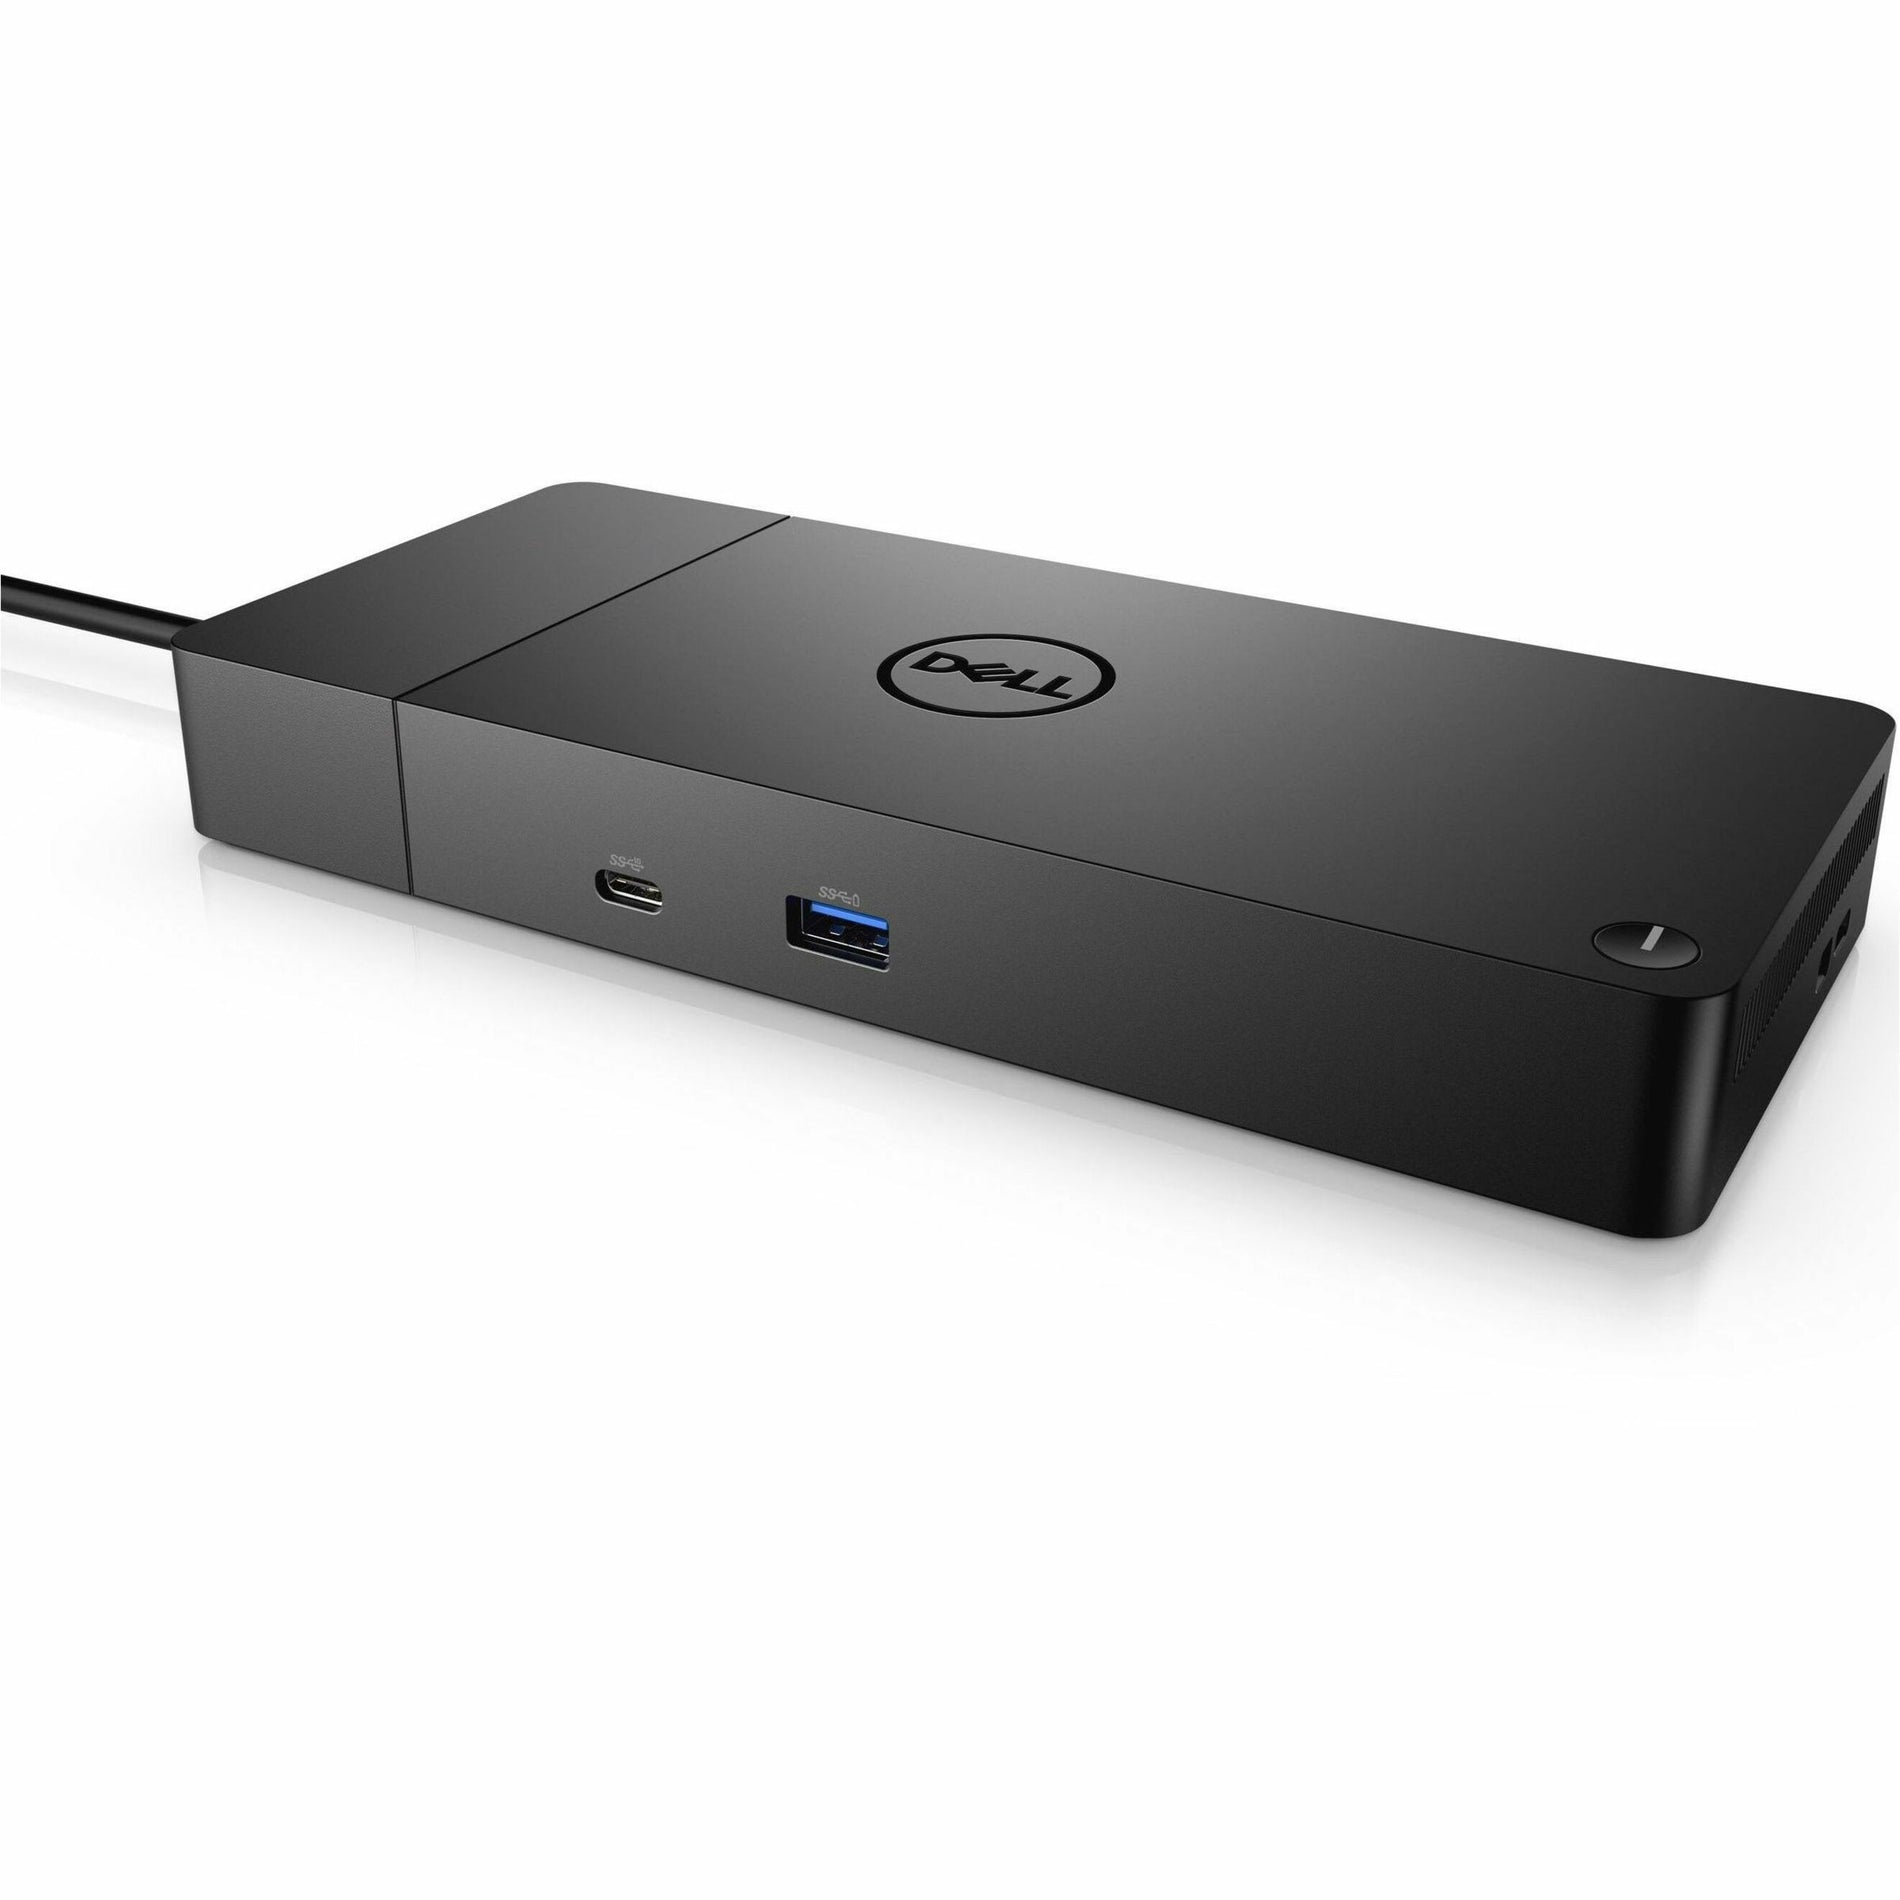 Dell DELL-WD19S130W Dock - WD19S 130W, USB-C Docking Station with 130W Power Delivery, HDMI, DisplayPort, USB Type-C, USB Type-A, Gigabit Ethernet